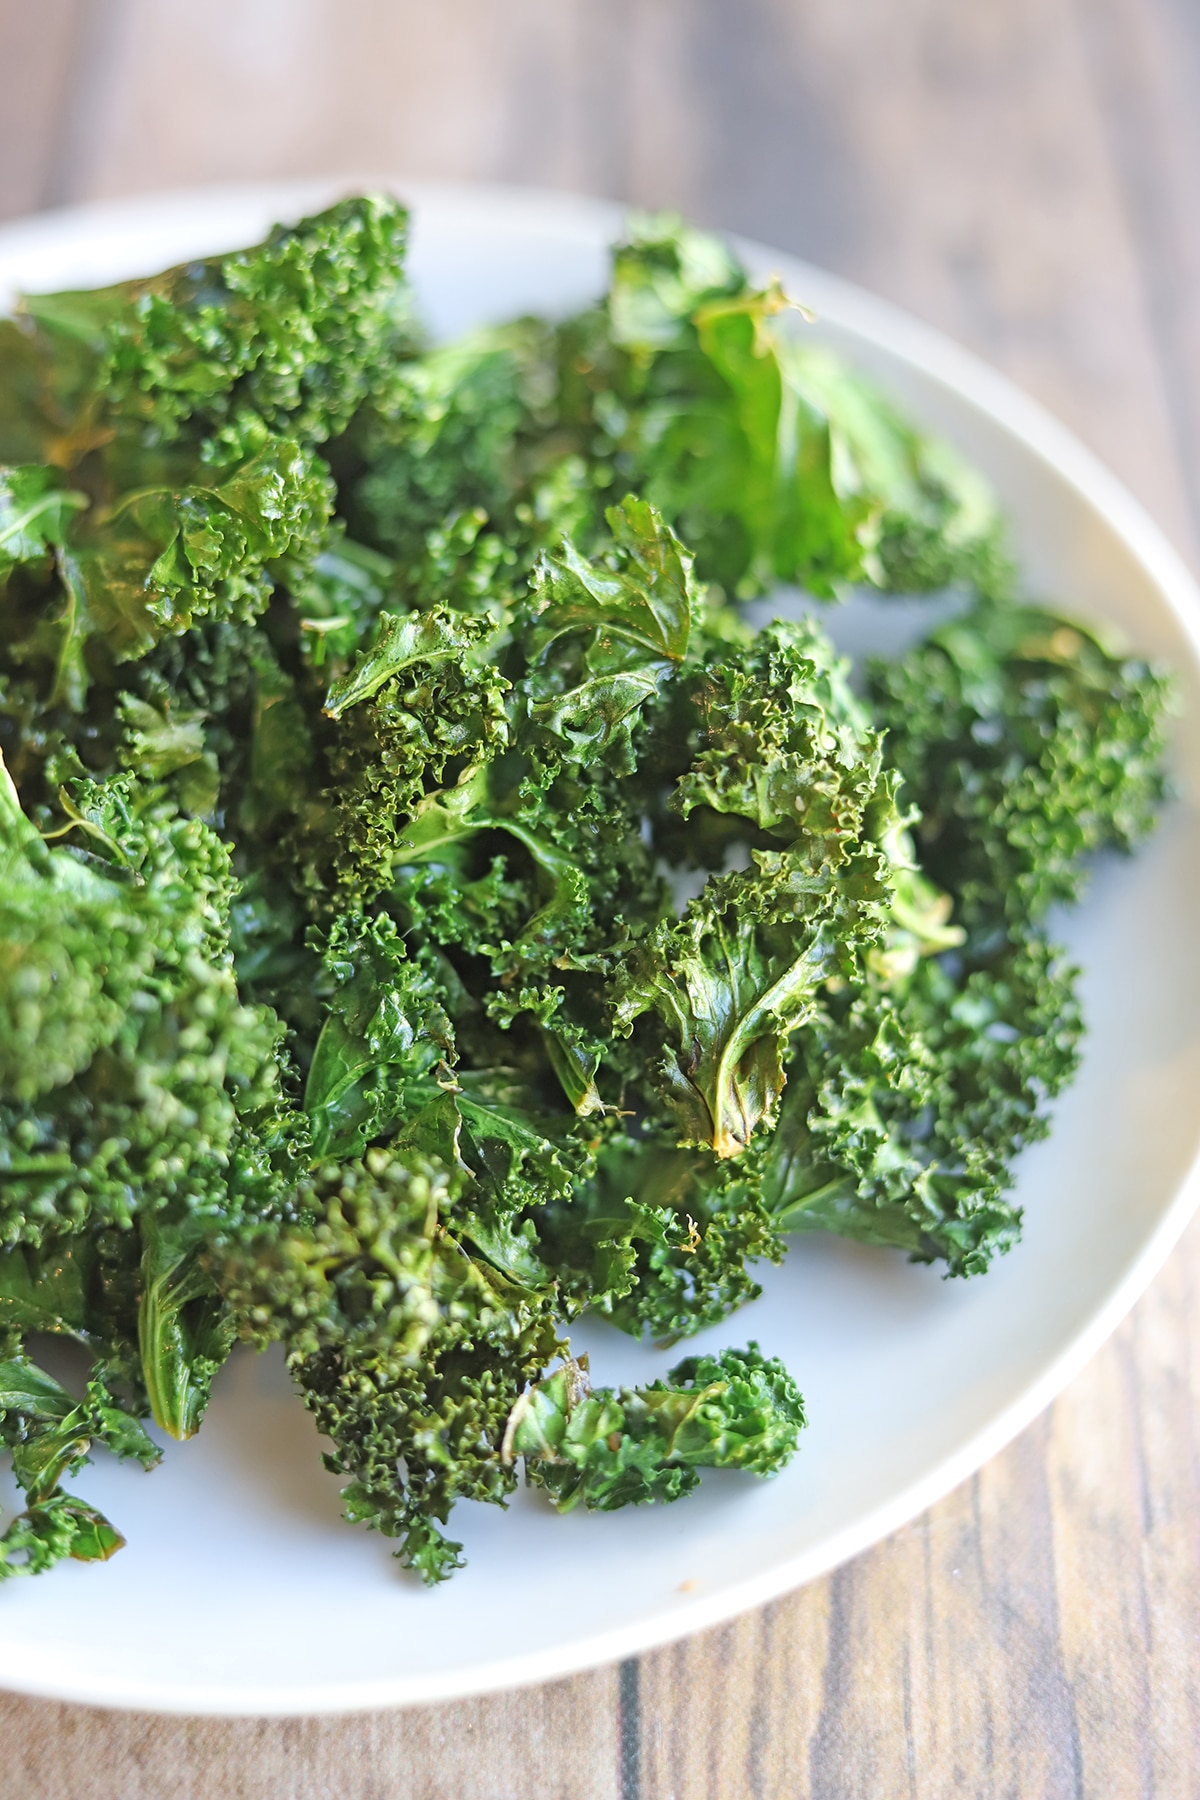 Kale chips on white plate.